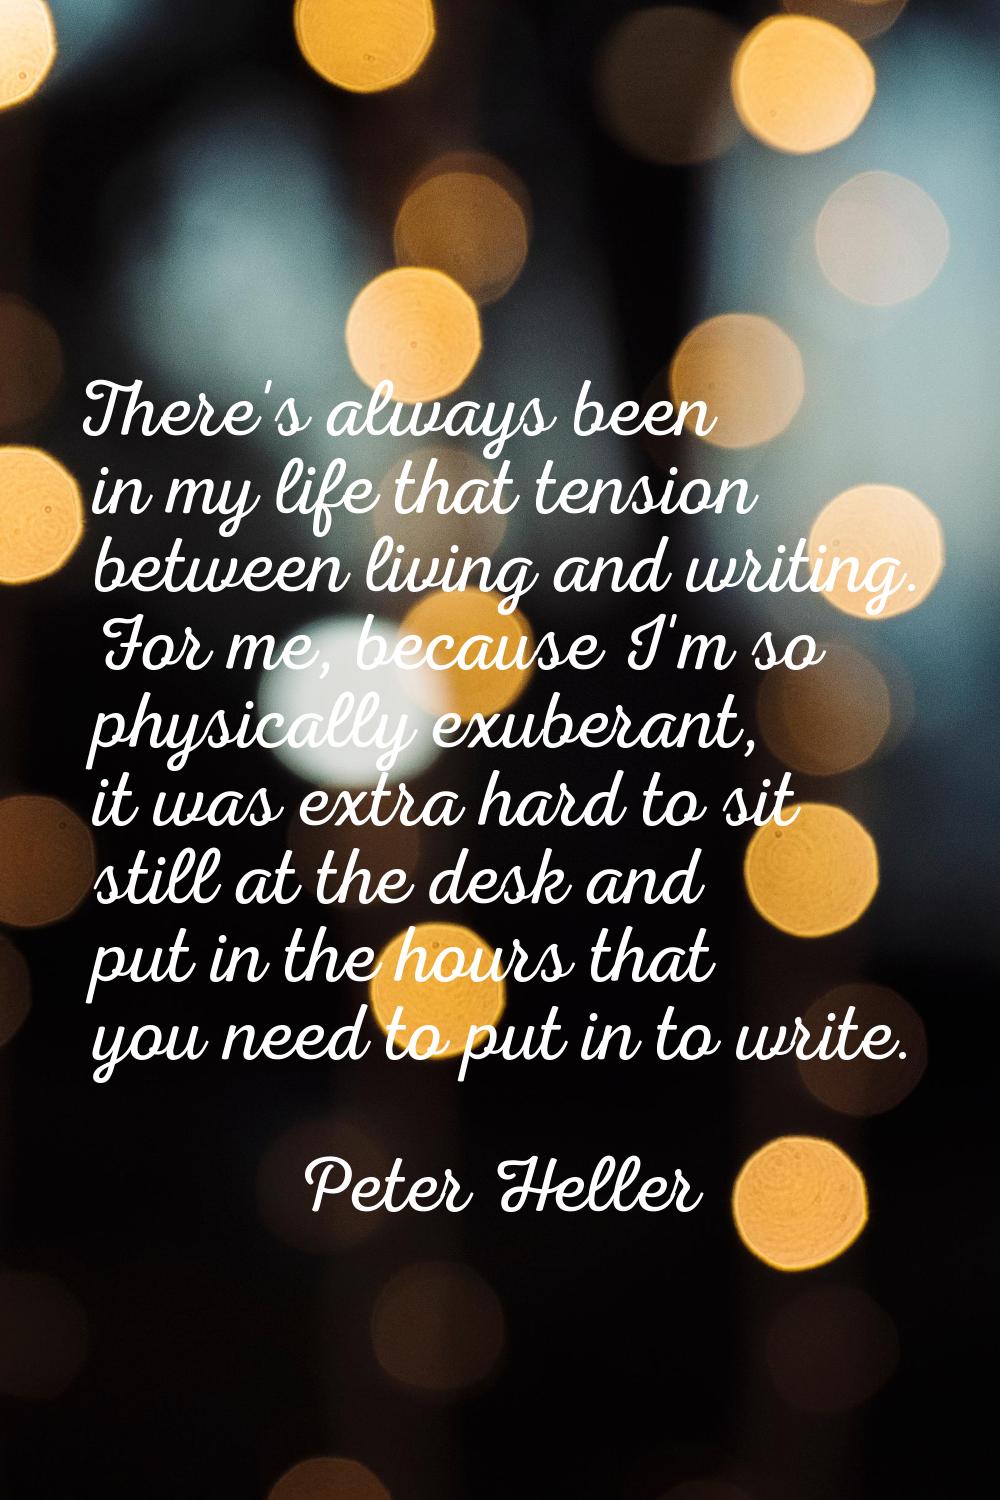 There's always been in my life that tension between living and writing. For me, because I'm so phys